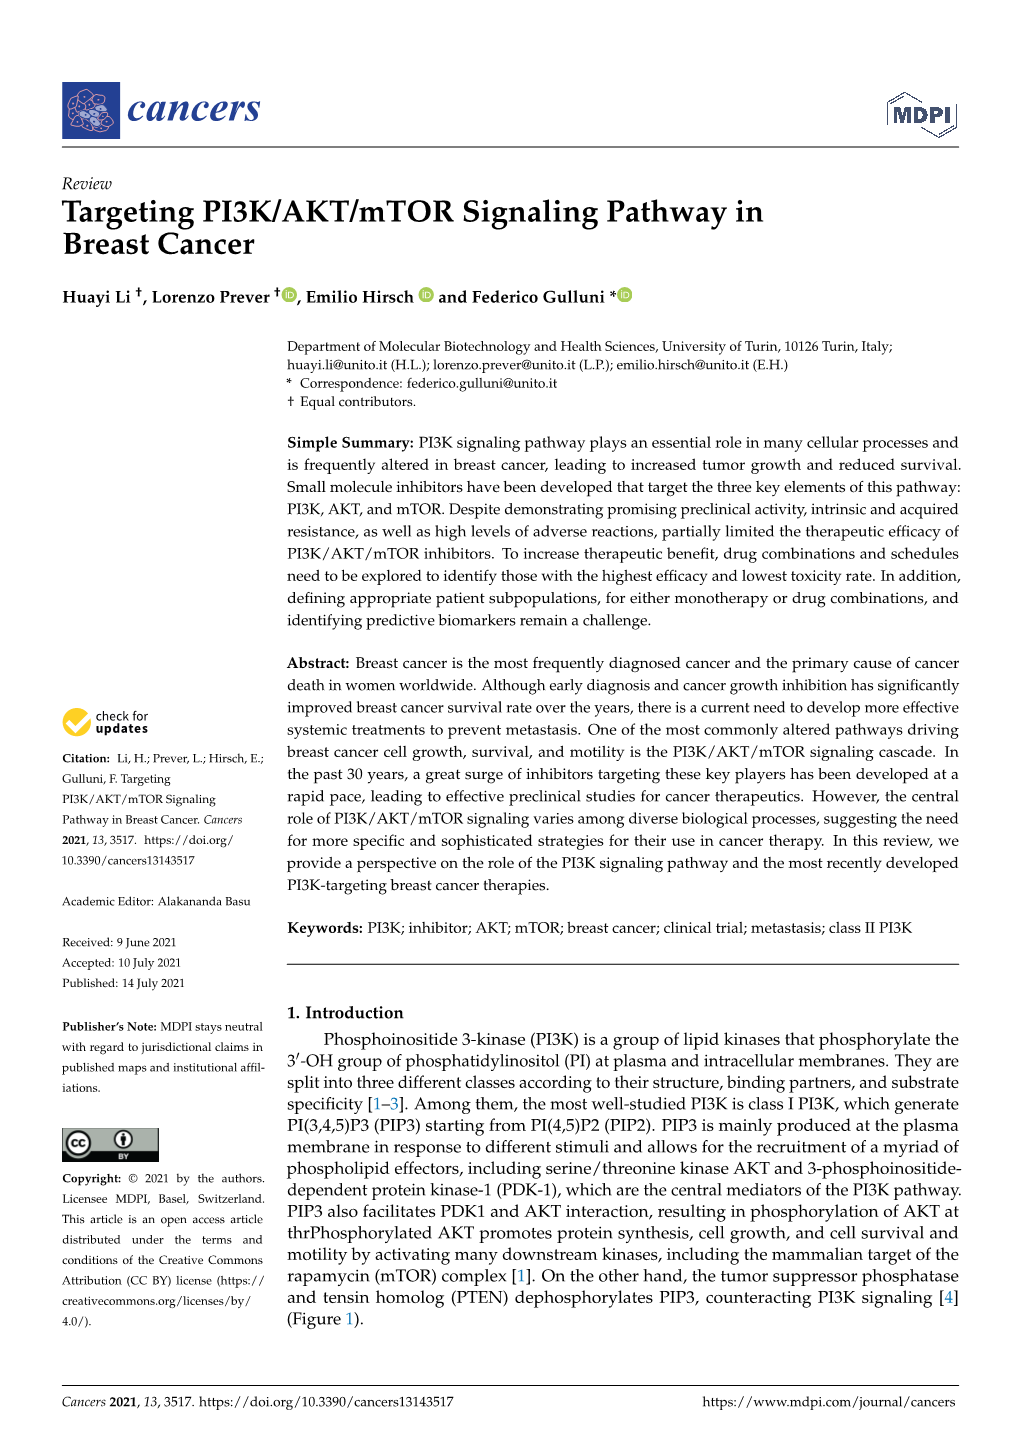 Targeting PI3K/AKT/Mtor Signaling Pathway in Breast Cancer